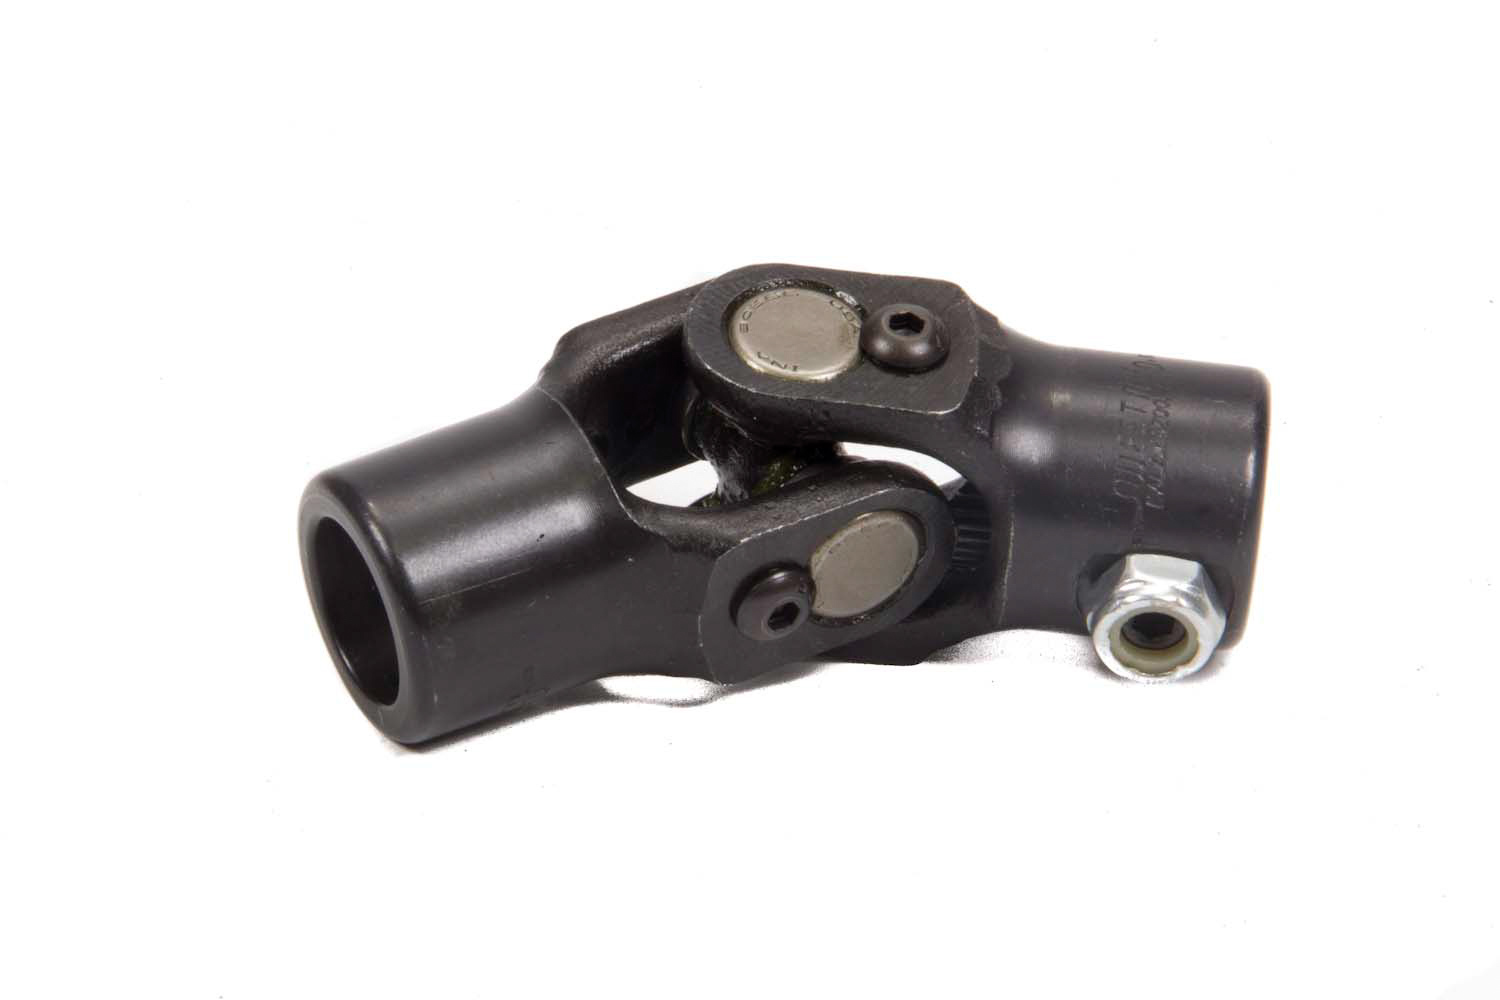 Sweet Manufacturing 401-51819 Steering Universal Joint, Single Joint, 1 in 48 Spline to 3/4 in Double D, Steel, Black Paint, Each